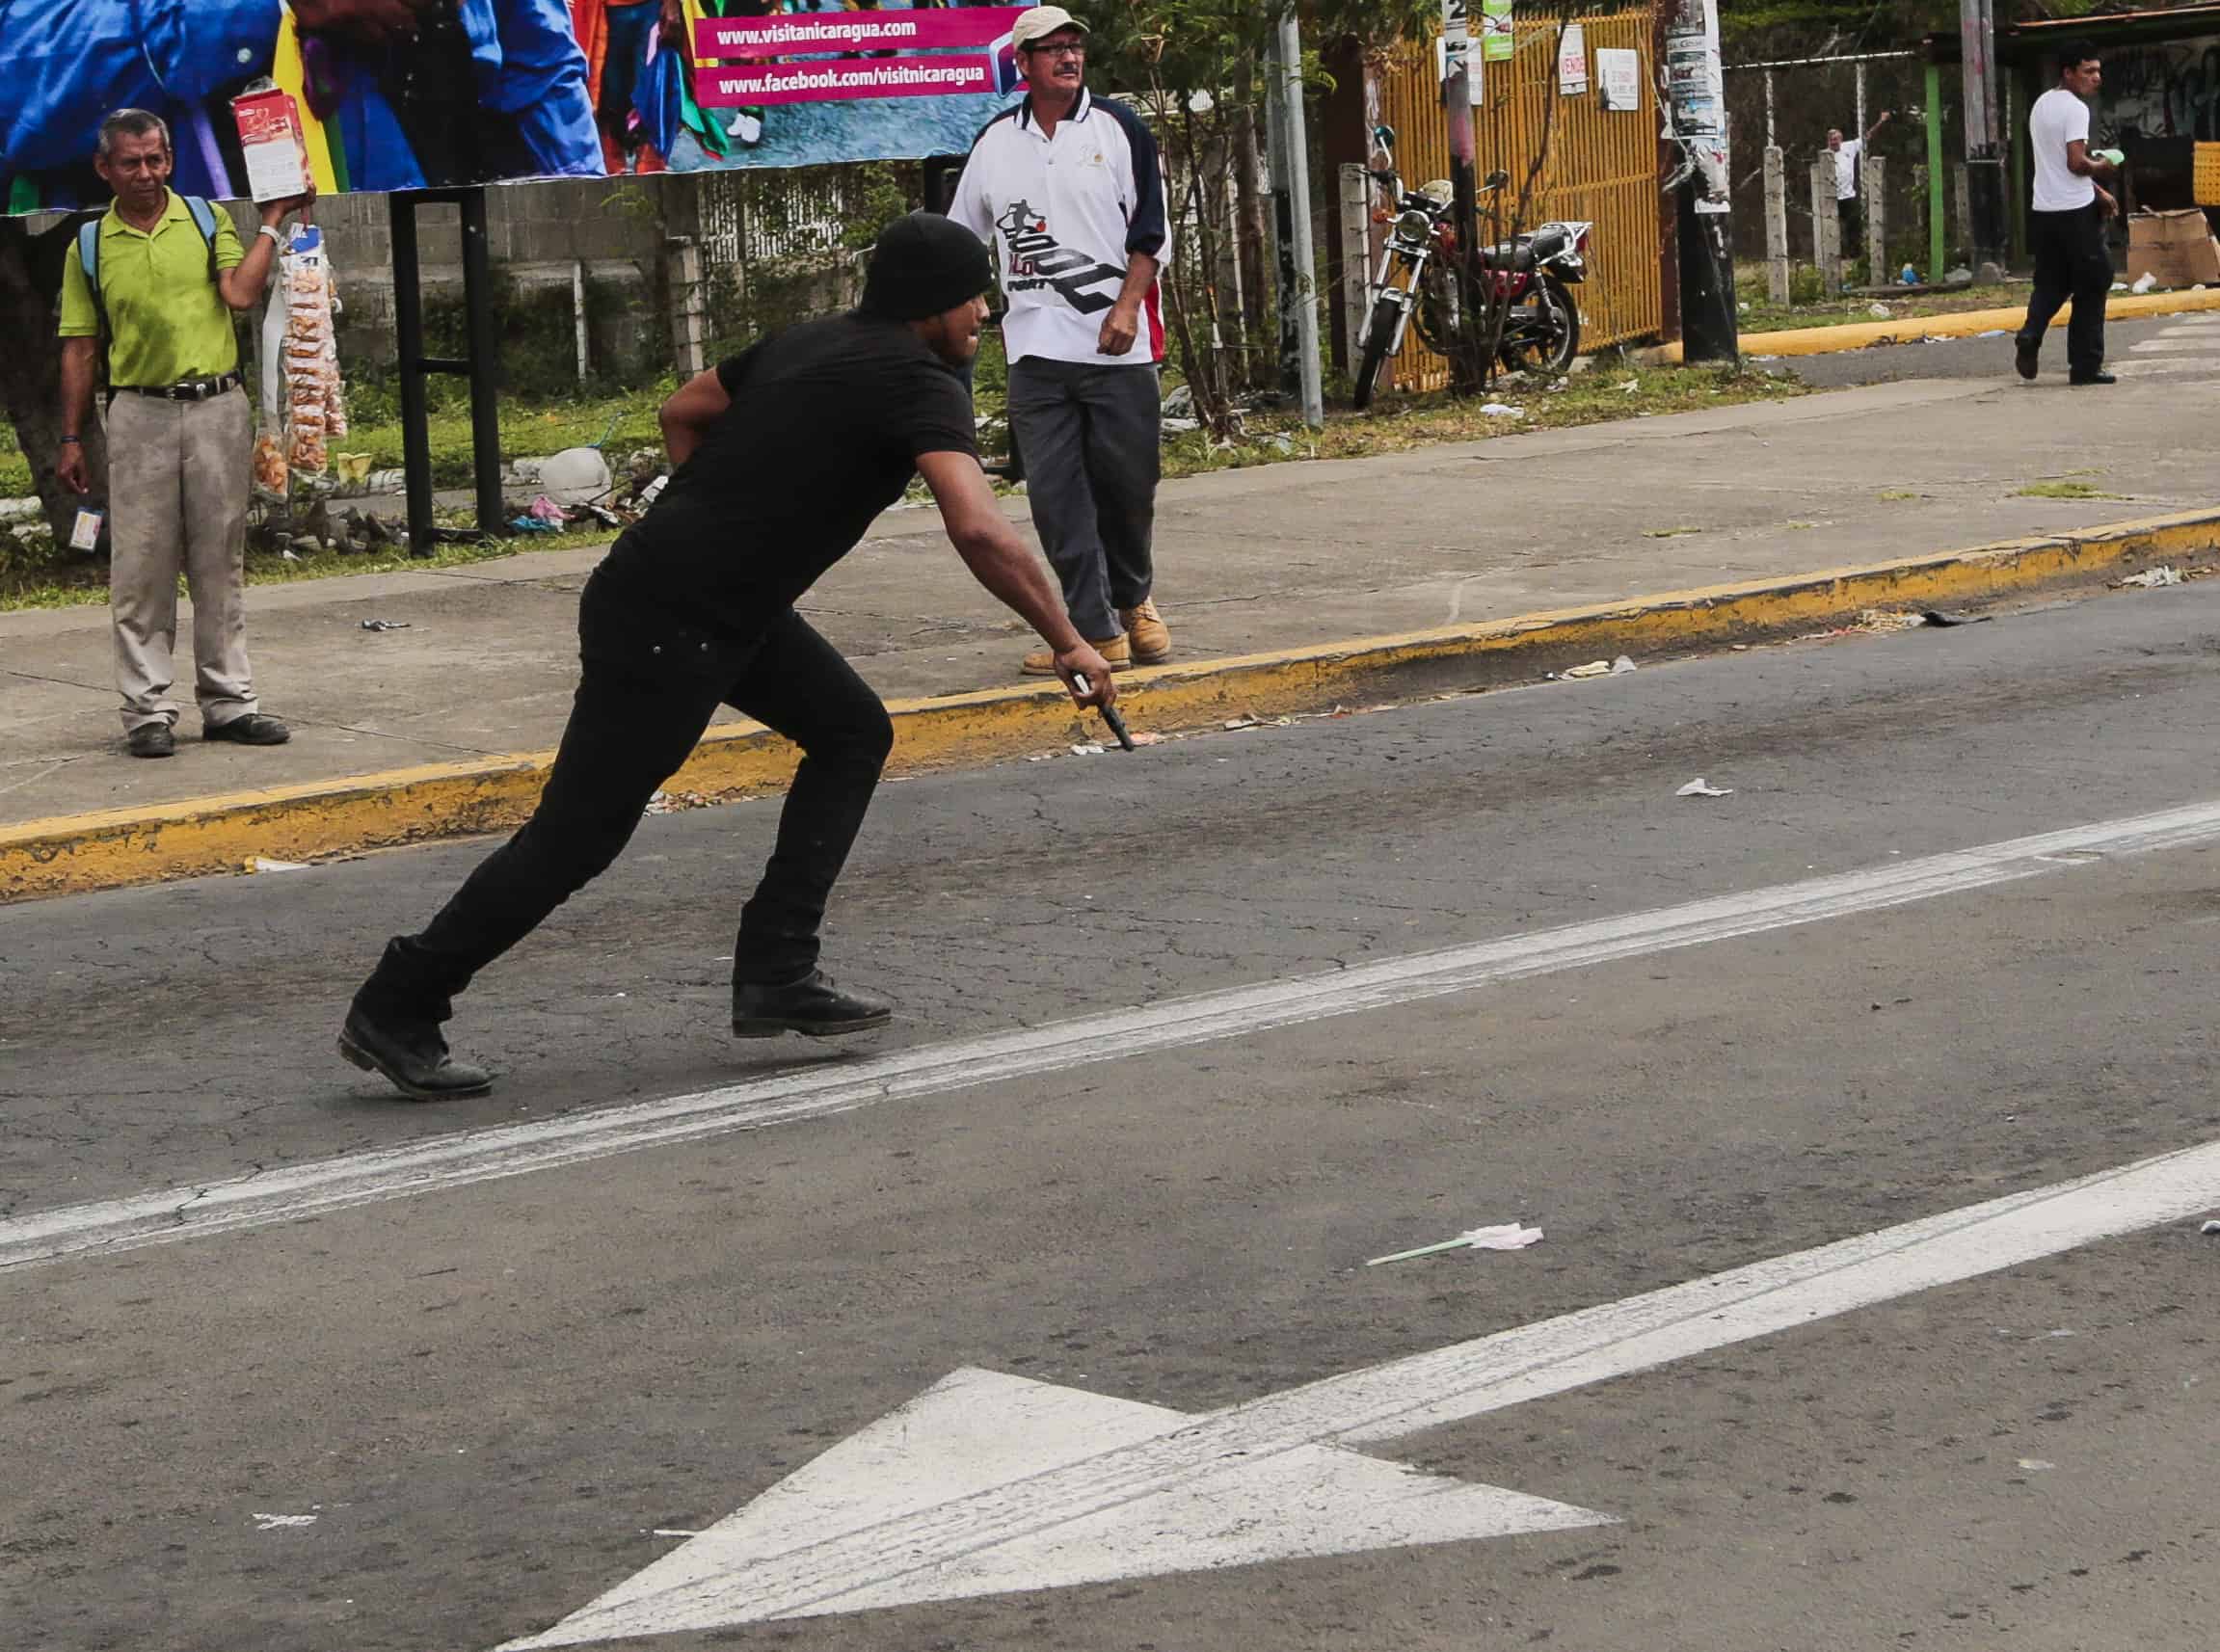 A Sandinista supporter runs with a pistol when chasing opposition members during a protest against the electoral system in Nicaragua, in Managua, on Sept. 2, 2015.